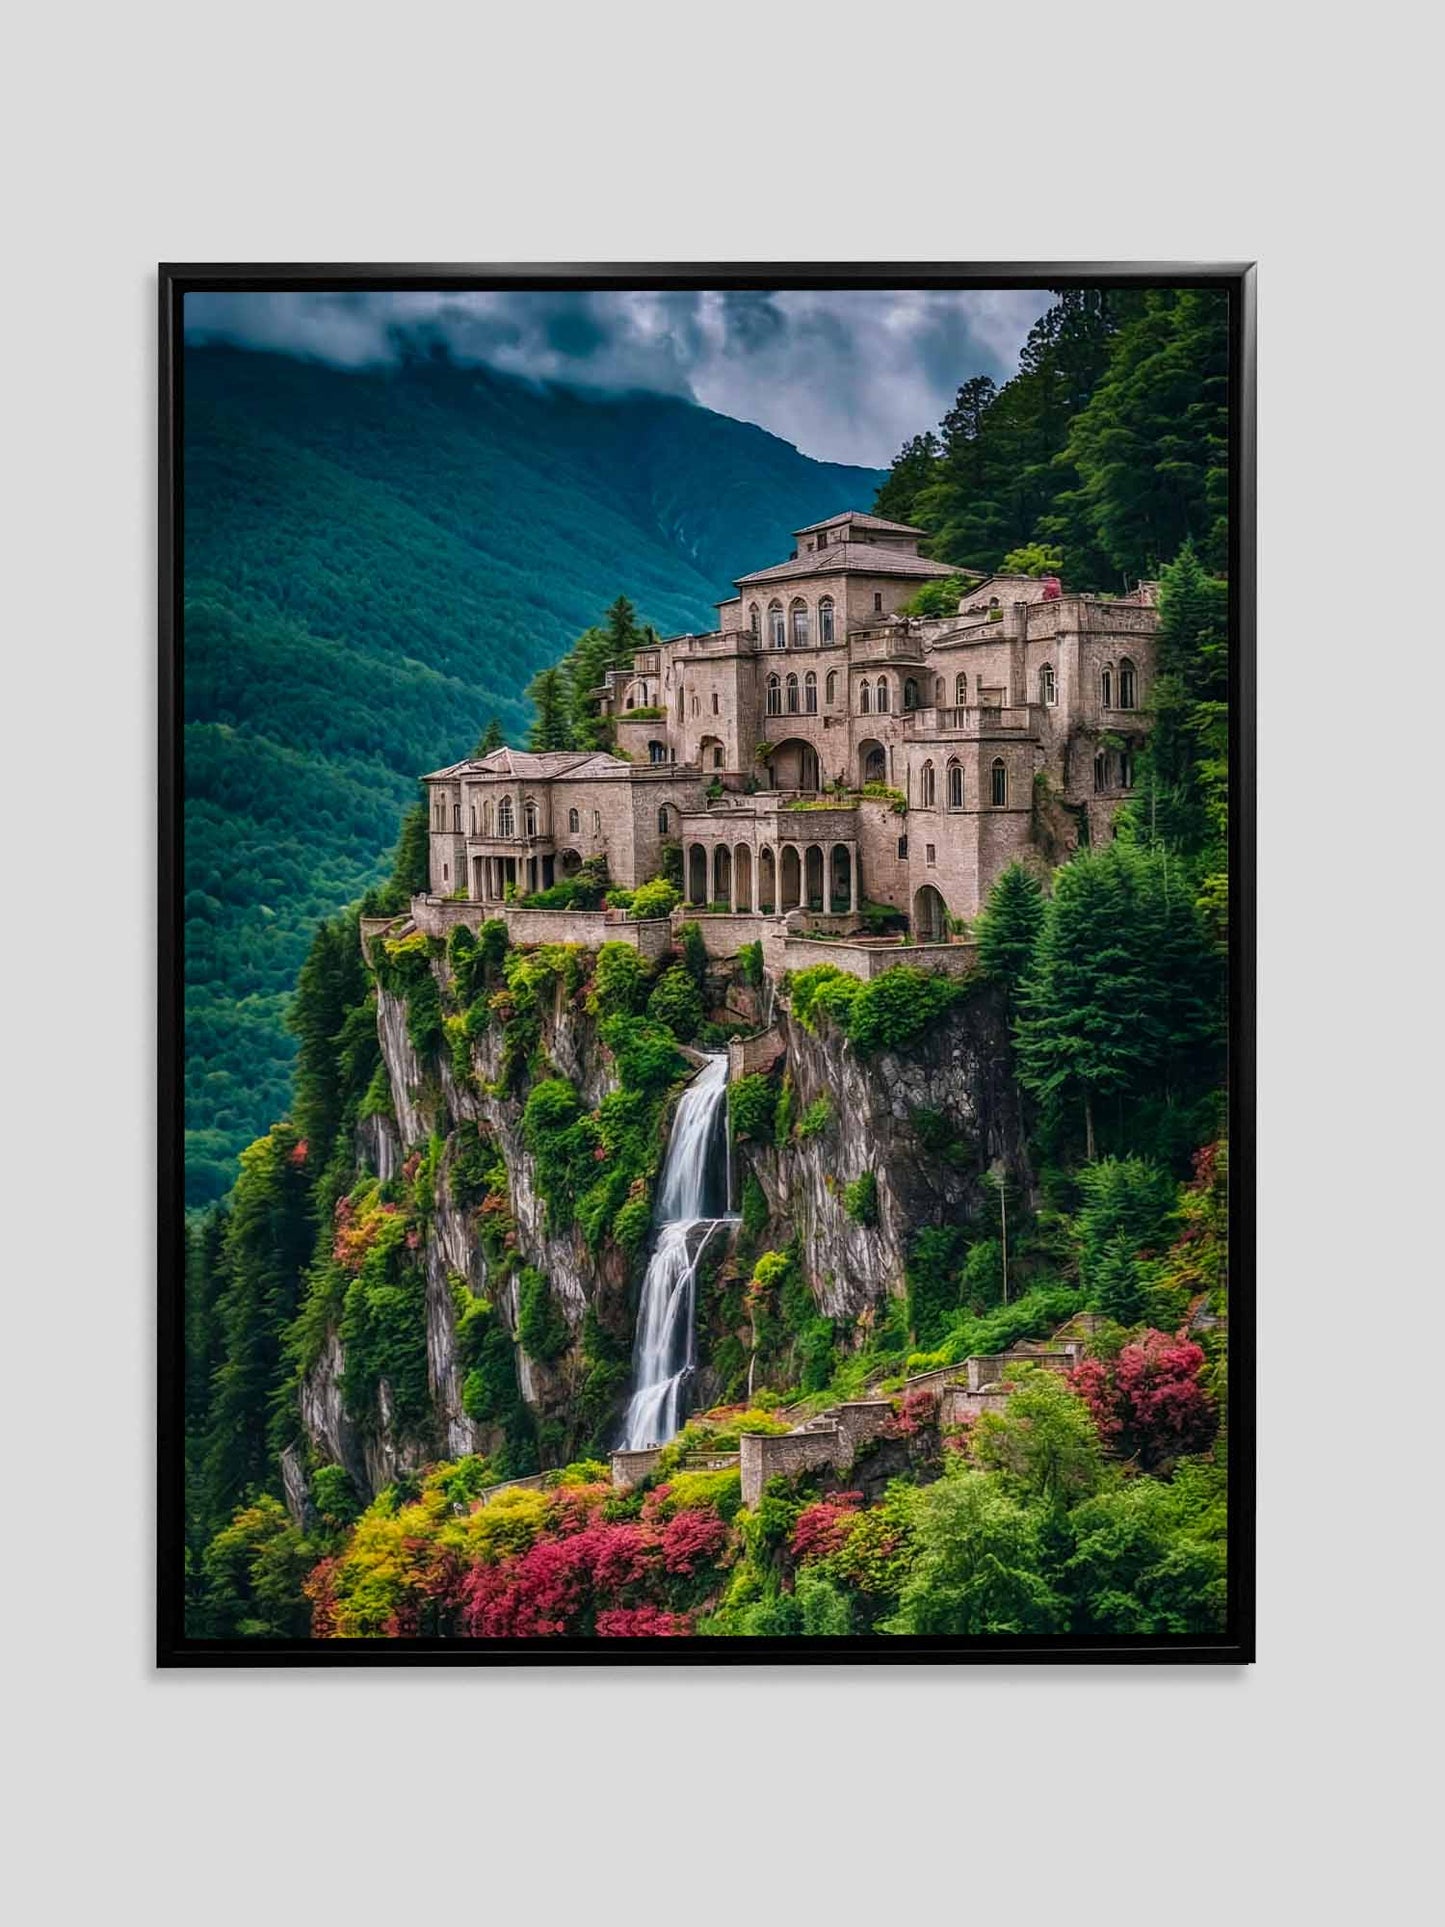 Fine Art Canvas Print with  Black floating frame. "Living Dream" the image shows an imposing castle on the edge of a cliff, also below the castle there is a waterfall and surrounding trees that contrast with the incredible view.